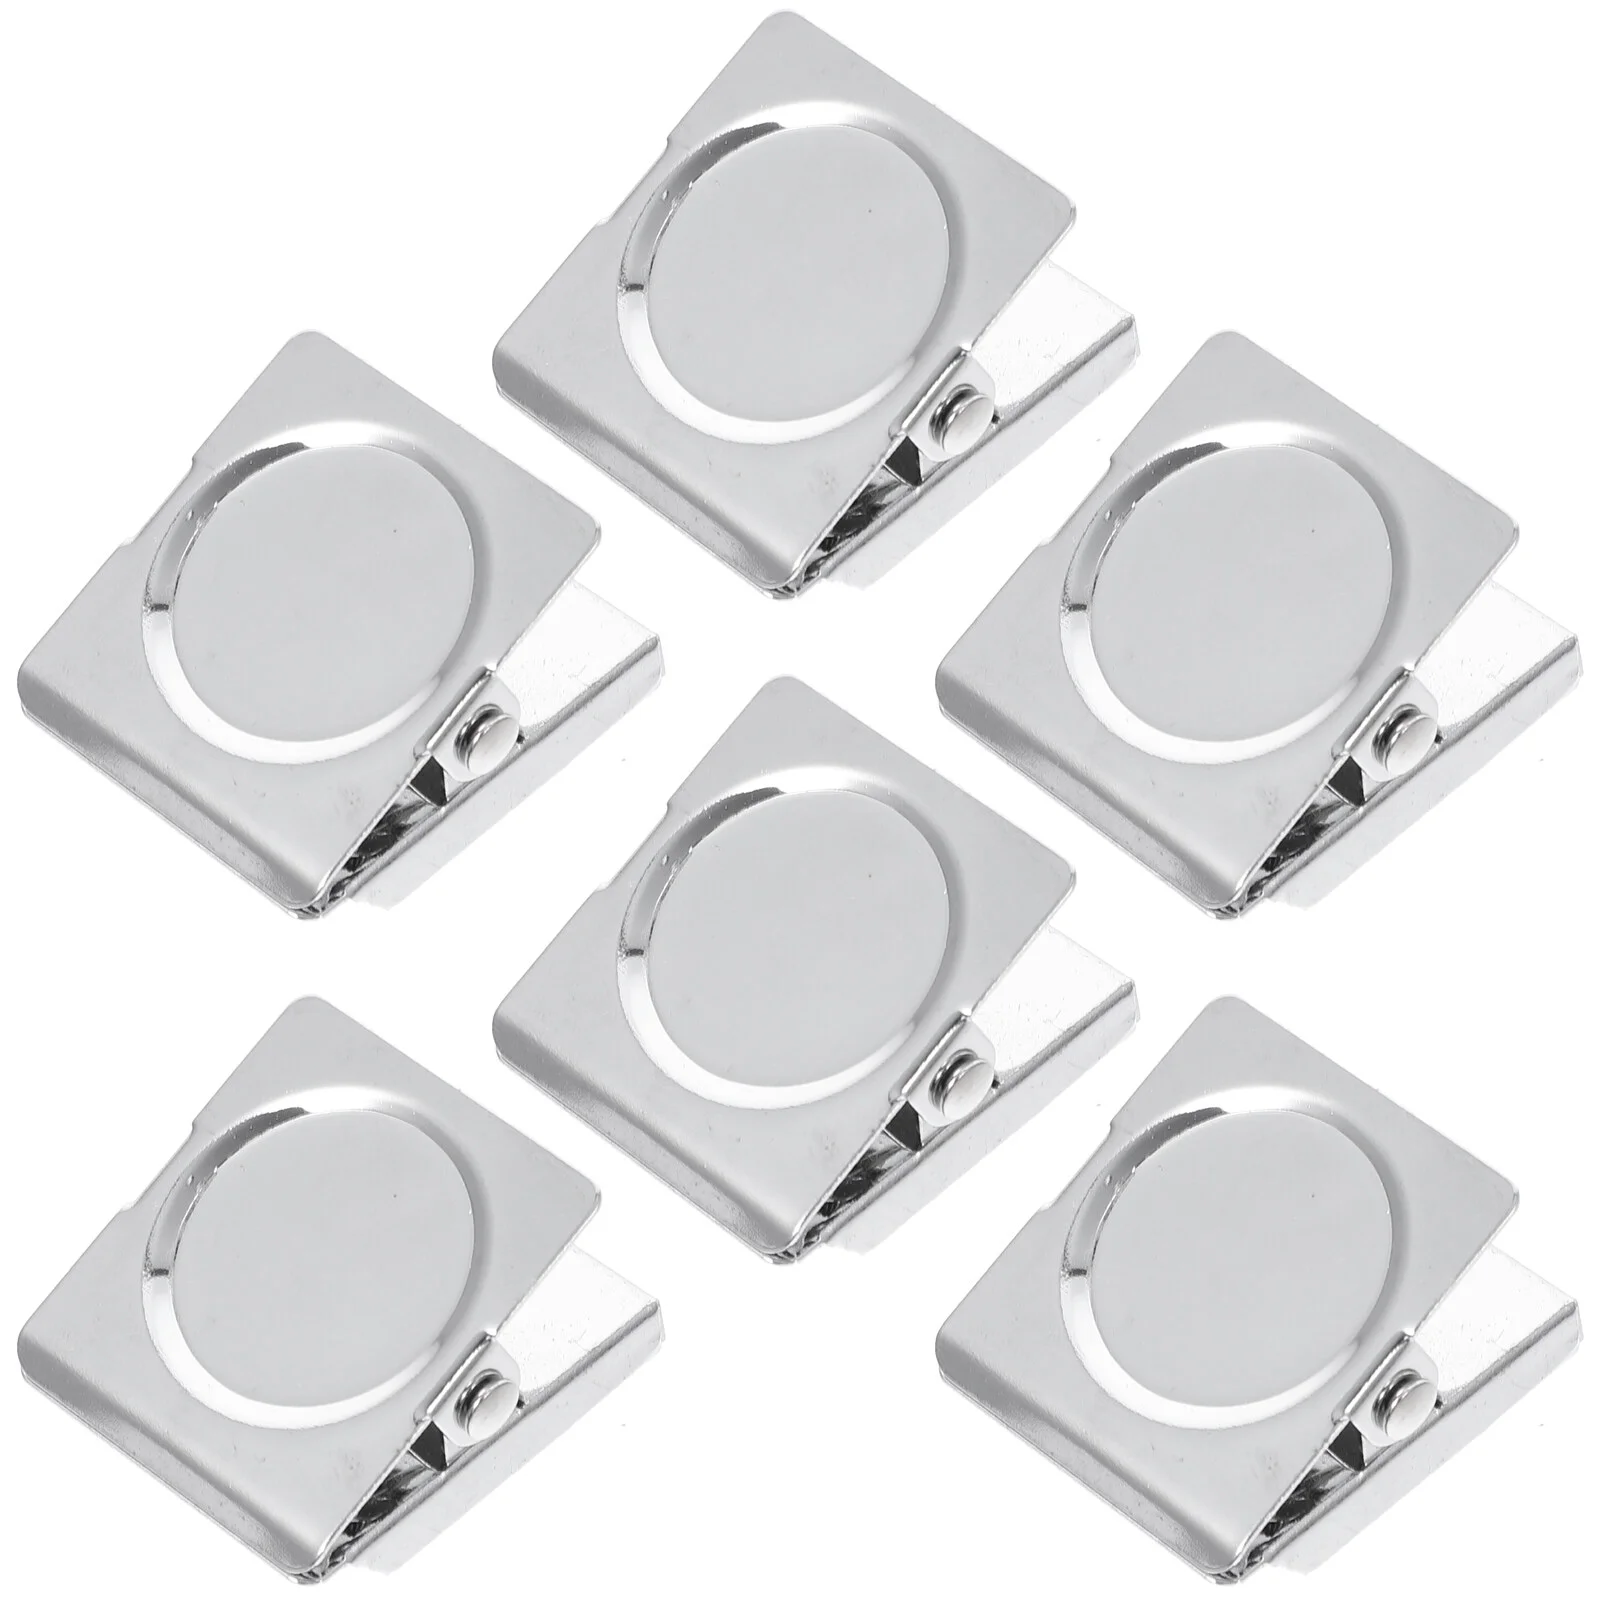 

6 Pcs Binder Portable Magnetic Clip Whiteboard Heavy Magnets Refrigerator Metal Memo Note Iron Duty